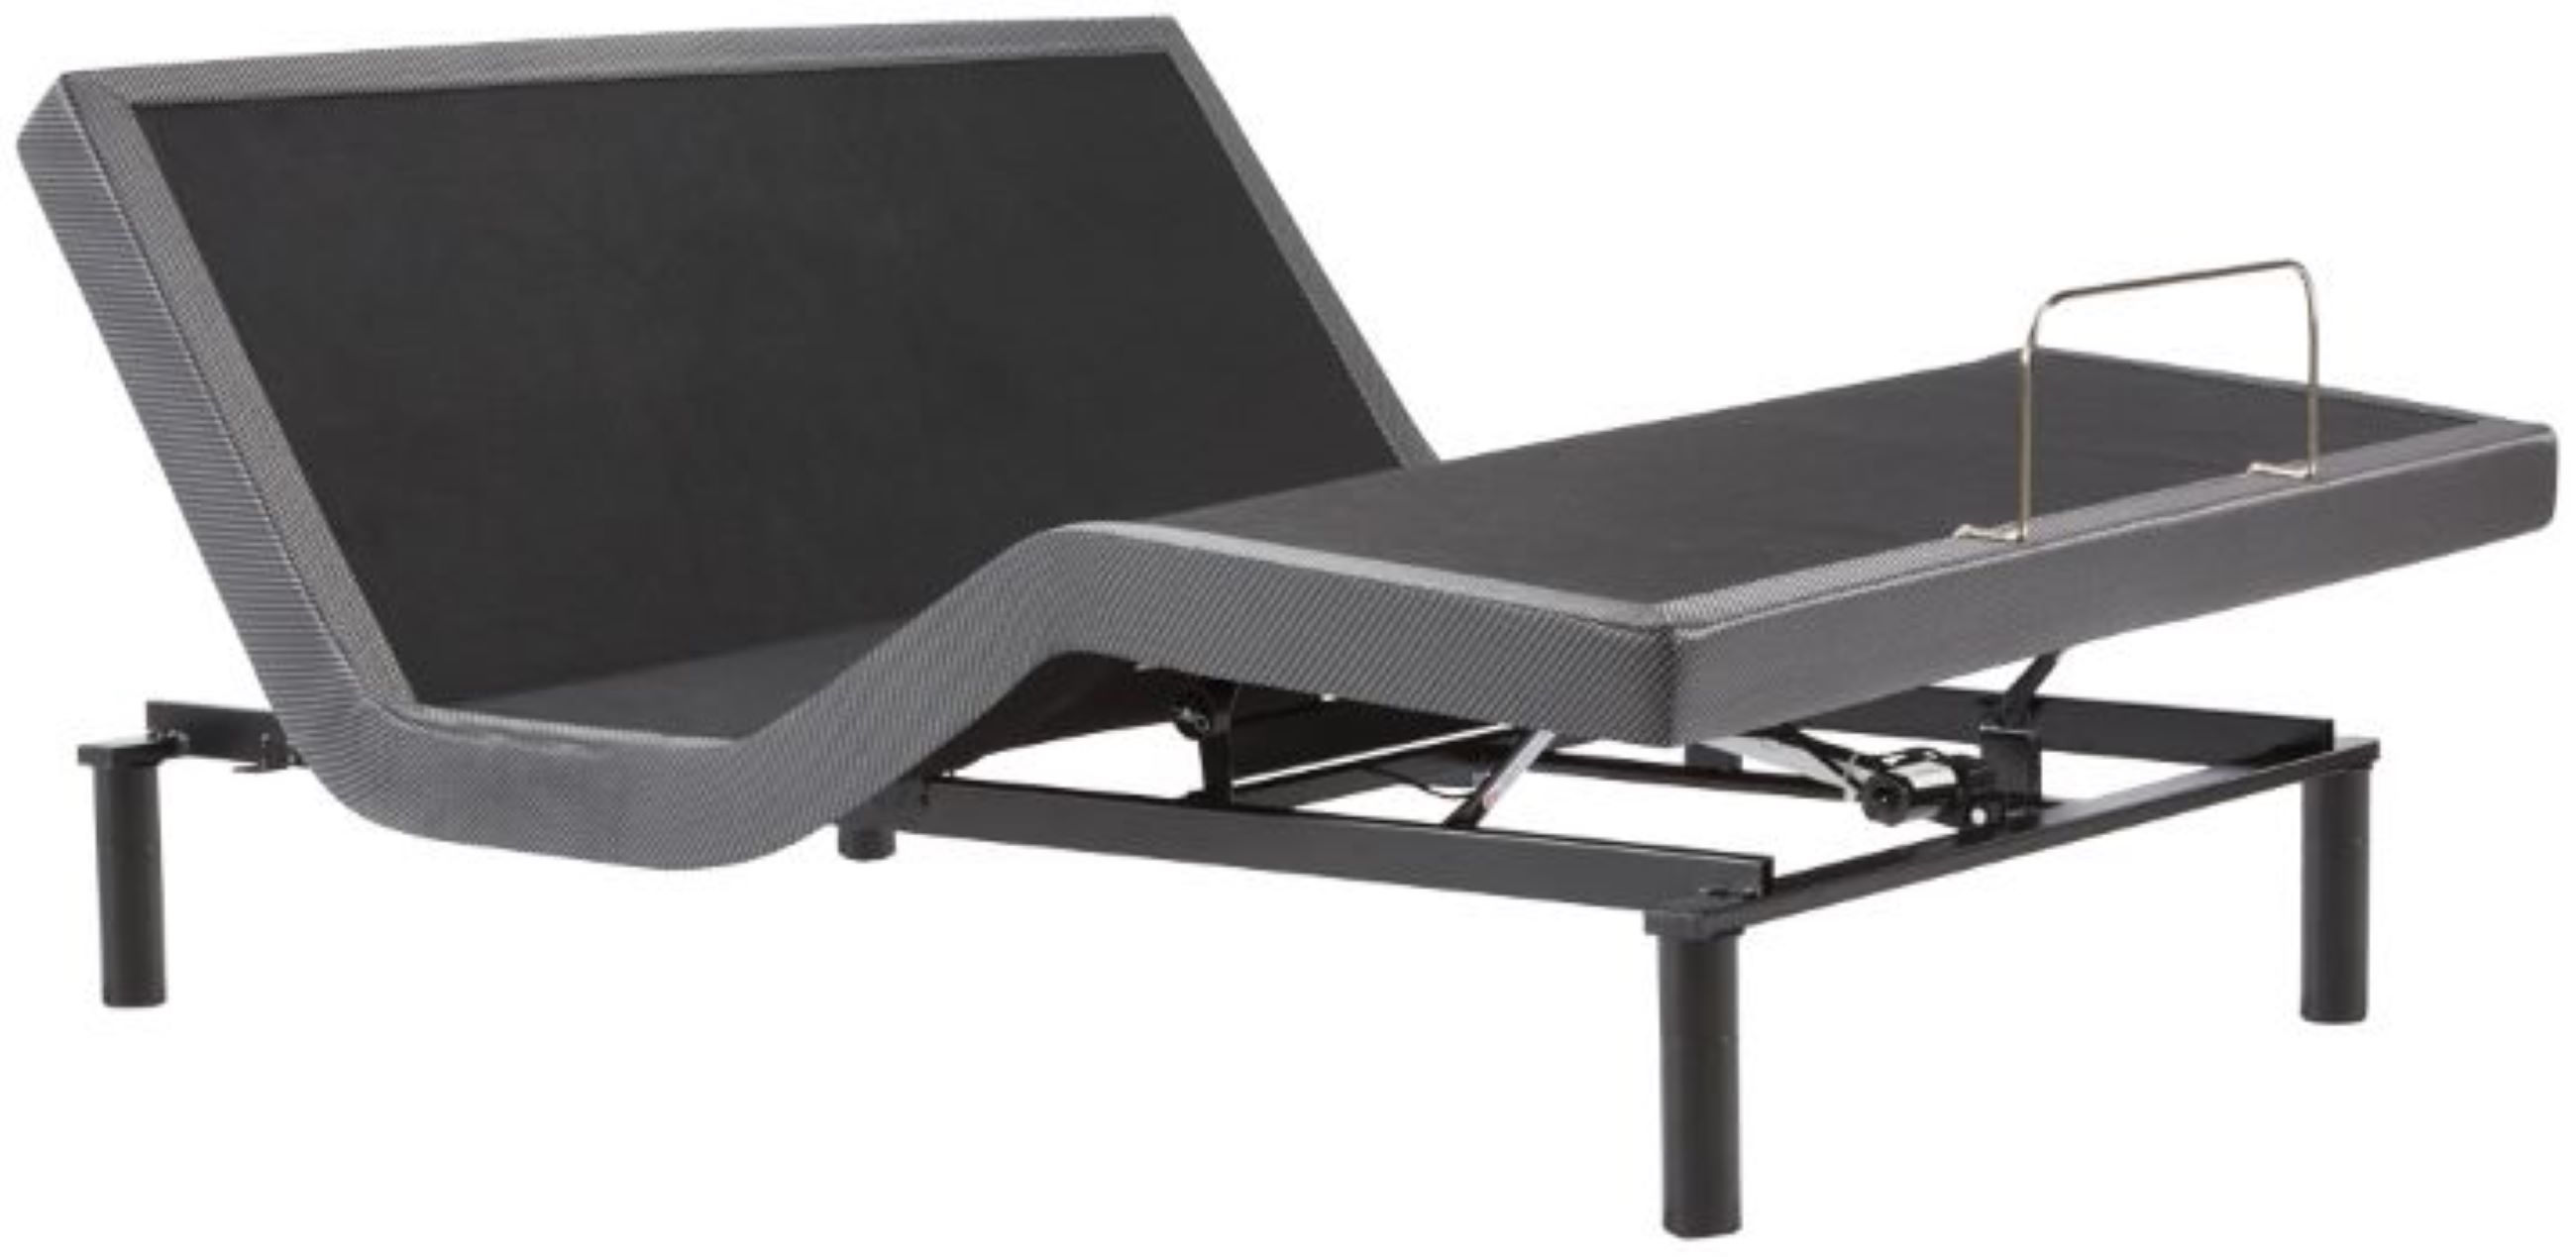 Beautyrest Advanced Motion Adjustable Base California King - (Must purchase 2 for complete set)